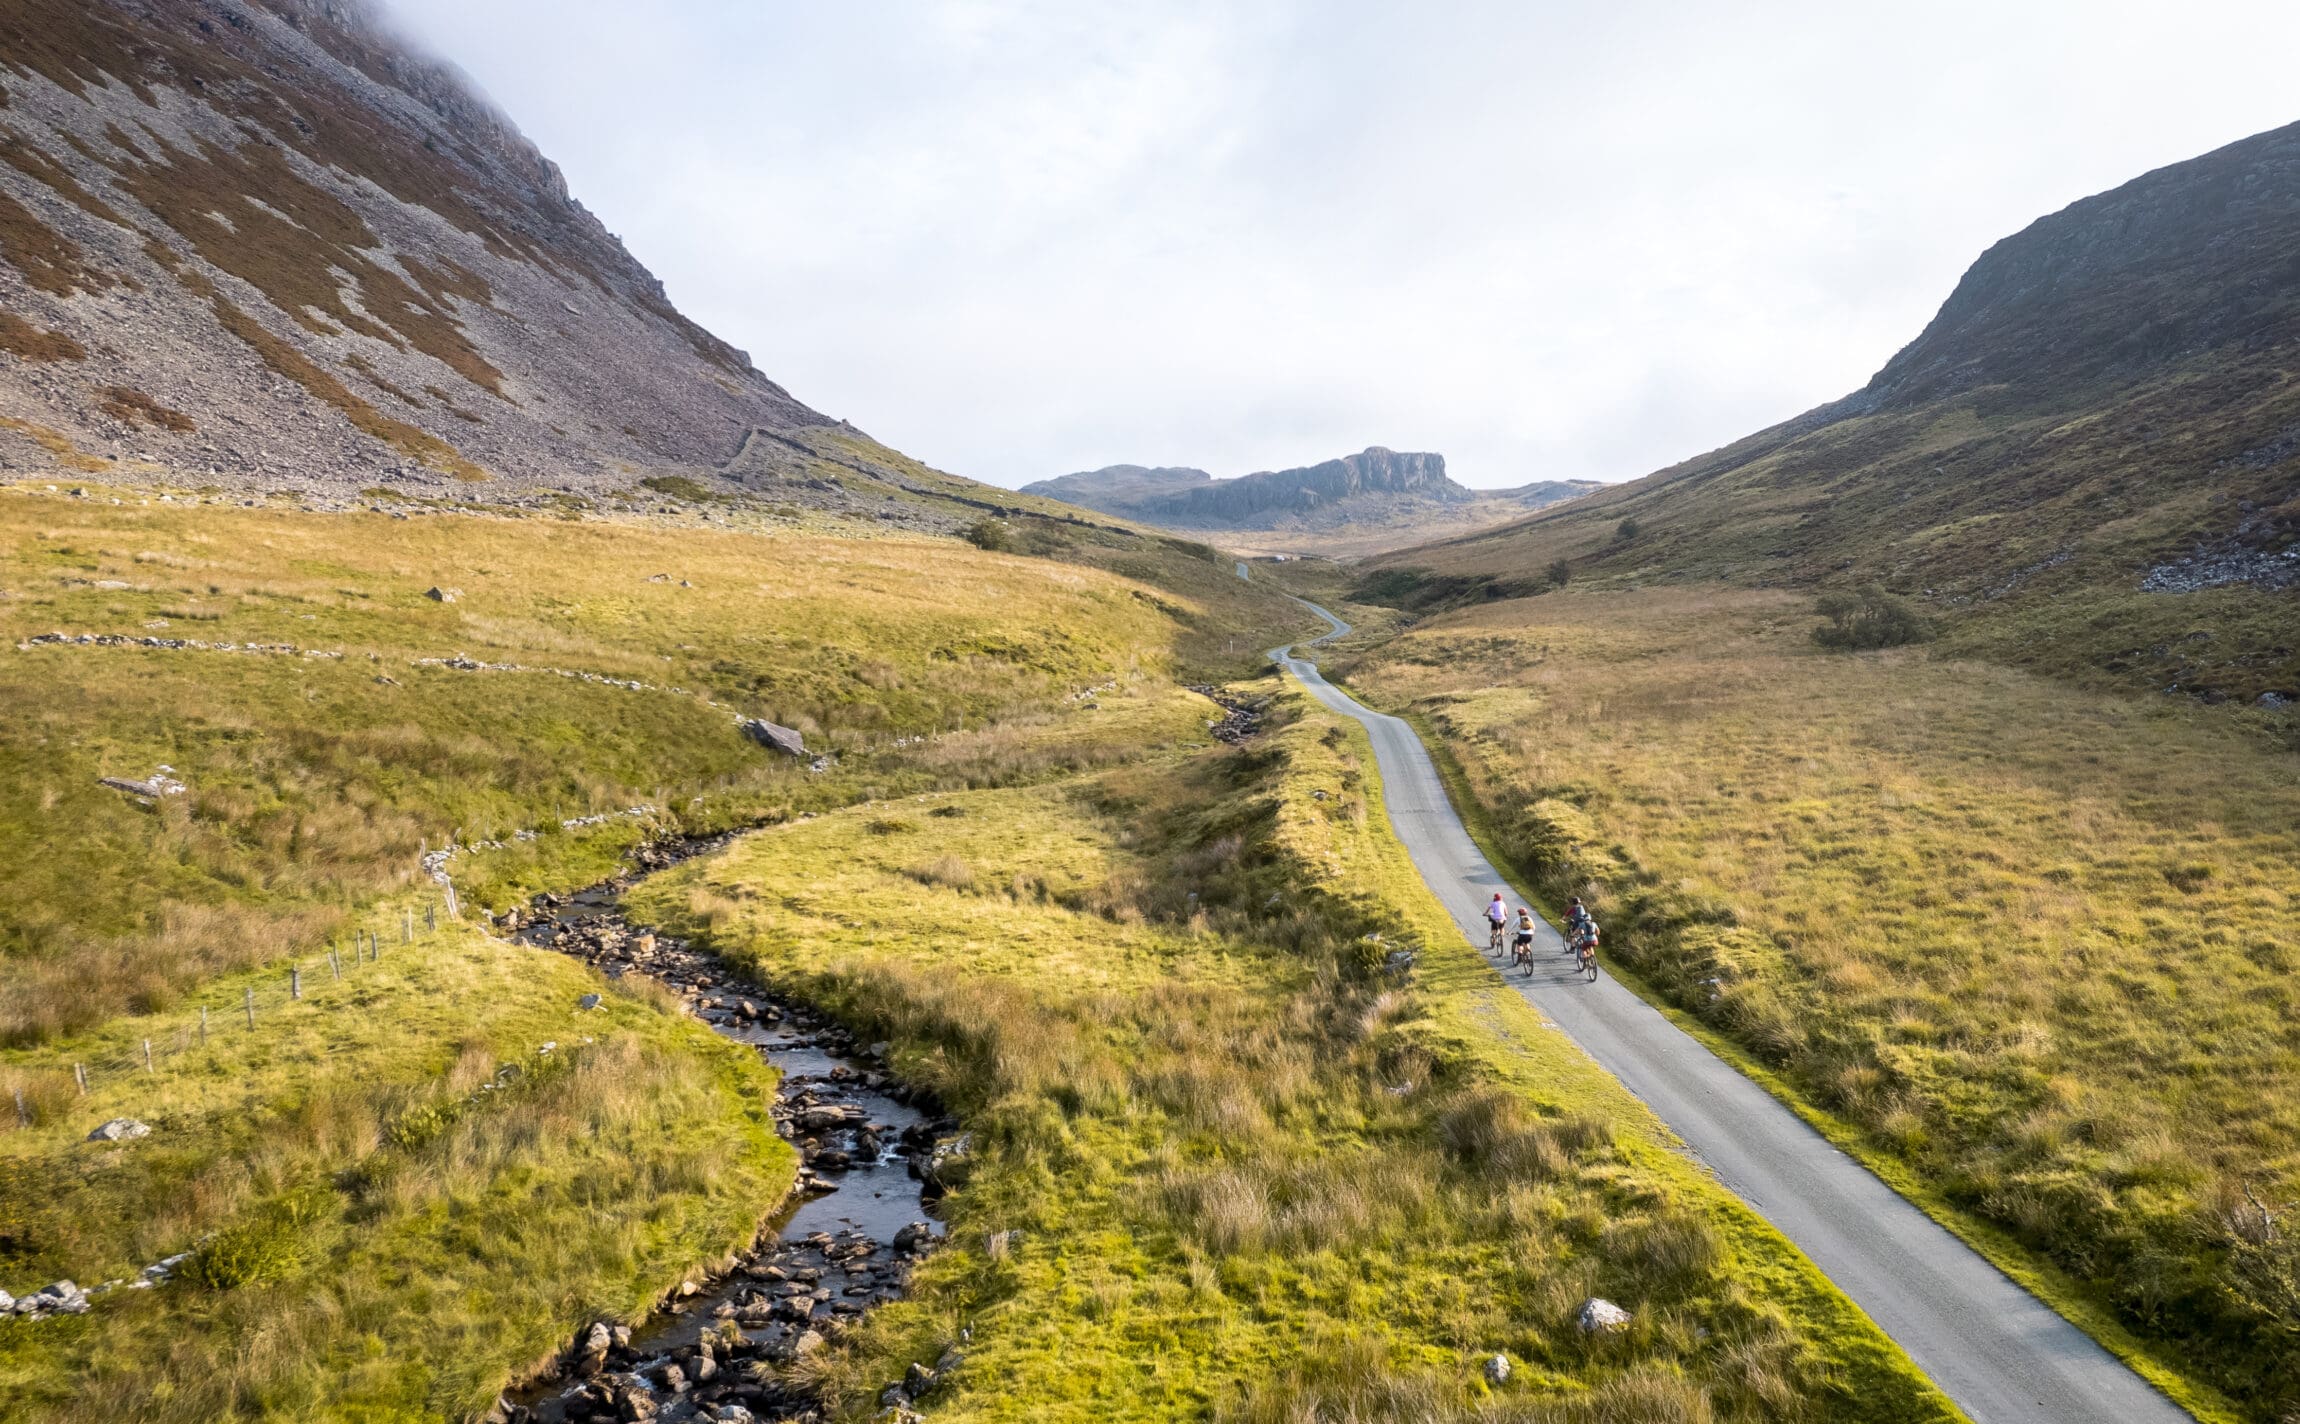 A complete guide to bikepacking in the UK | Riding up Cwm Teigl from Llan Ffestiniog on Cycling UK's Traws Eryri route. Photo by Sam Dugon